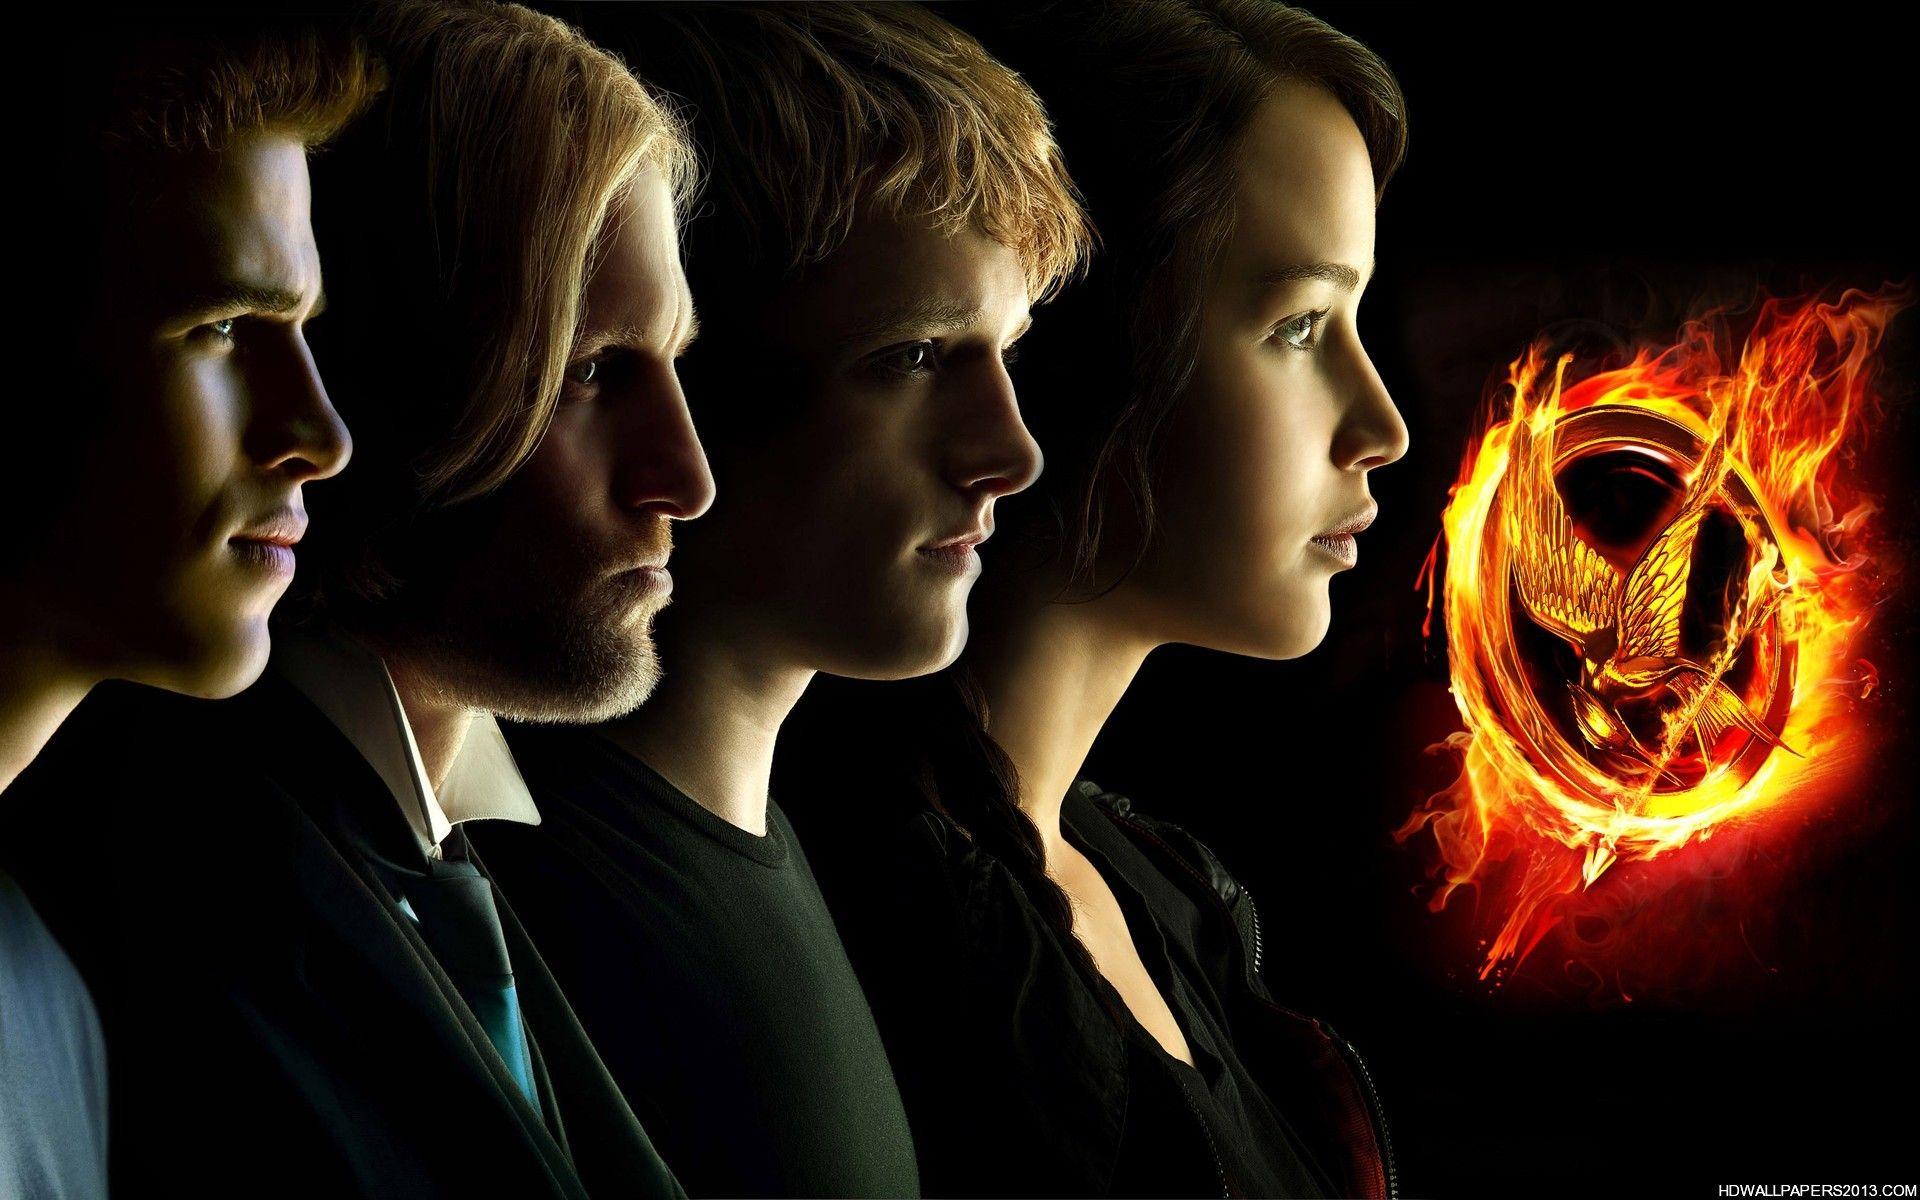 Wallpaper Blink of The Hunger Games Wallpaper HD for Android